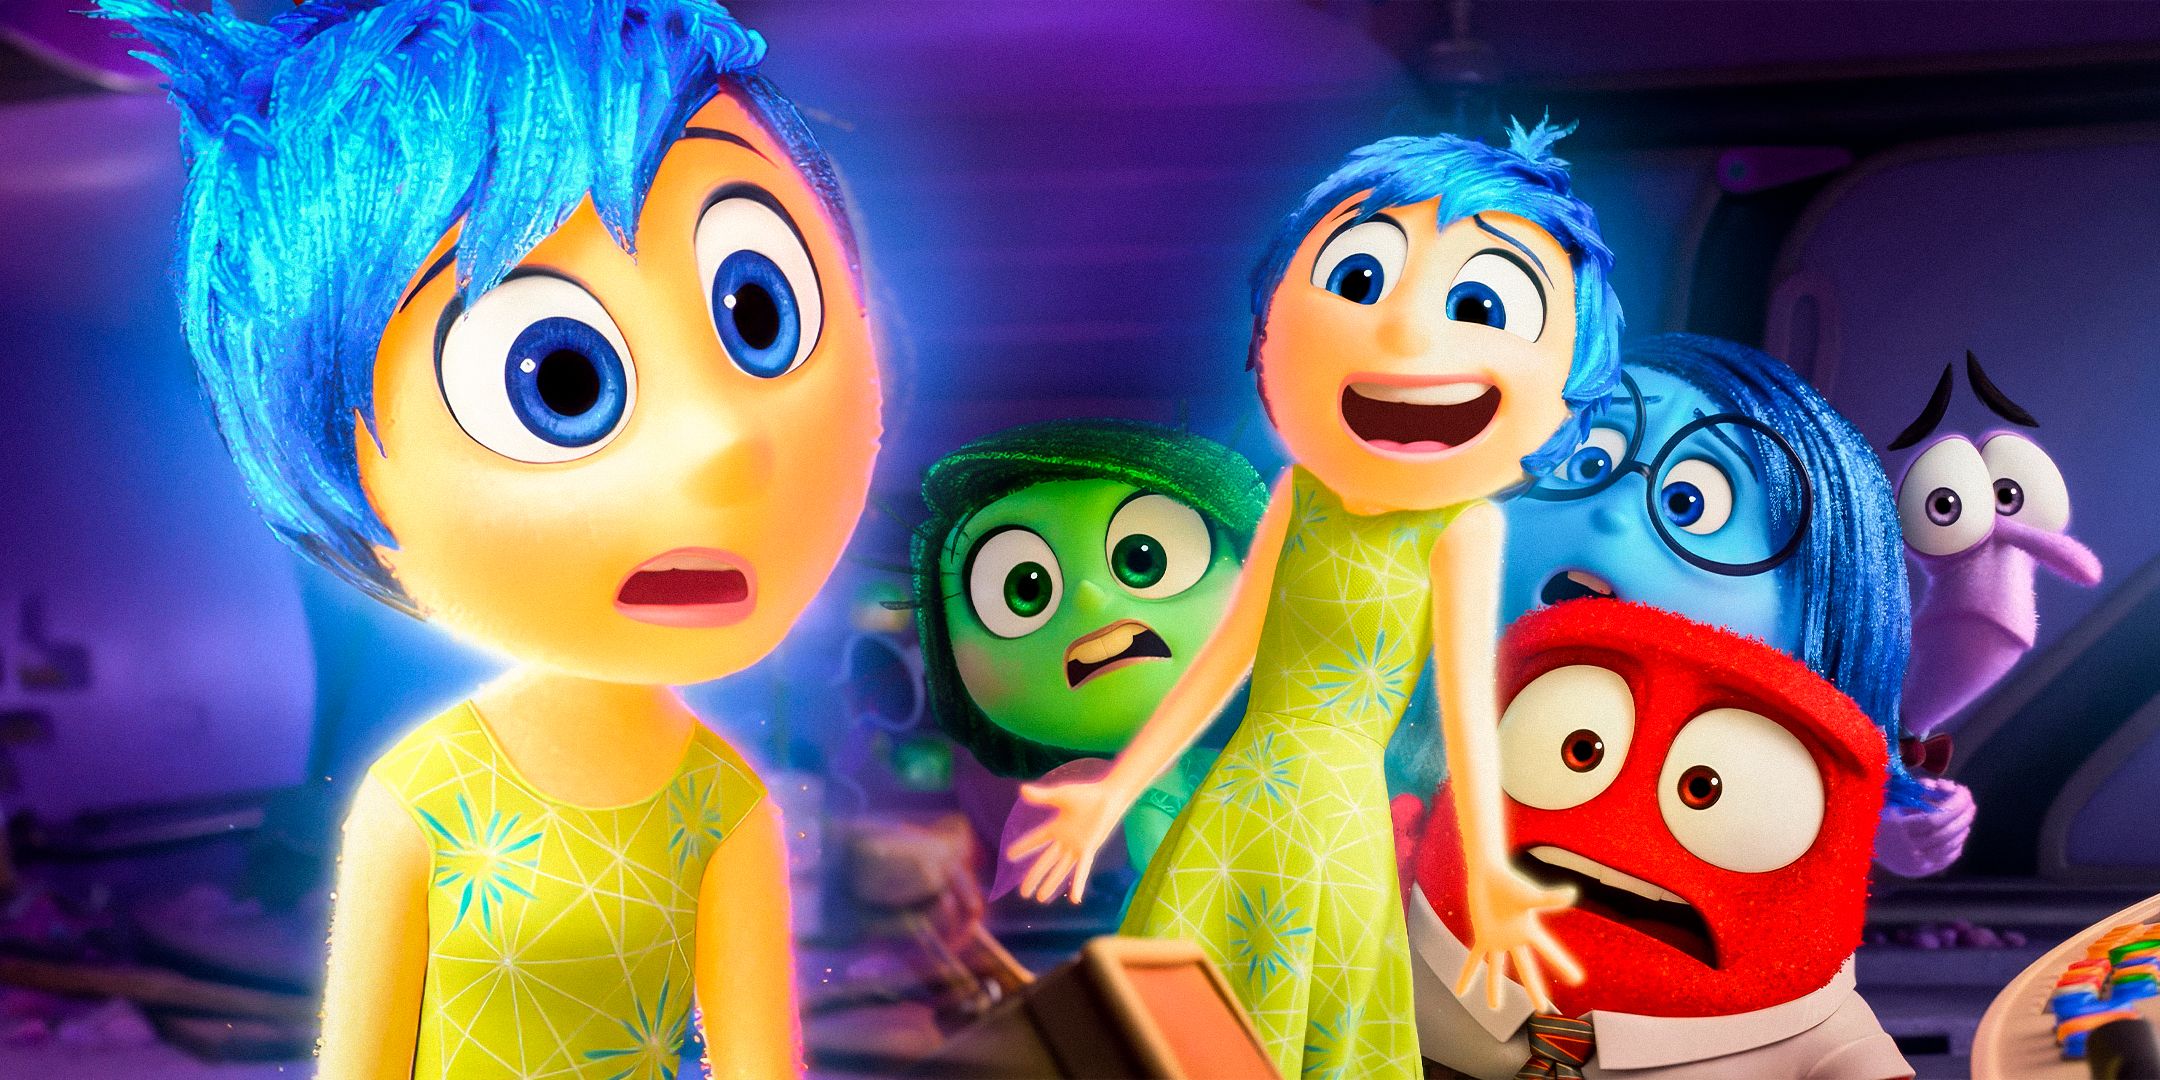 A split image of Joy looking confused and Joy shielding the other emotions in Inside Out 2